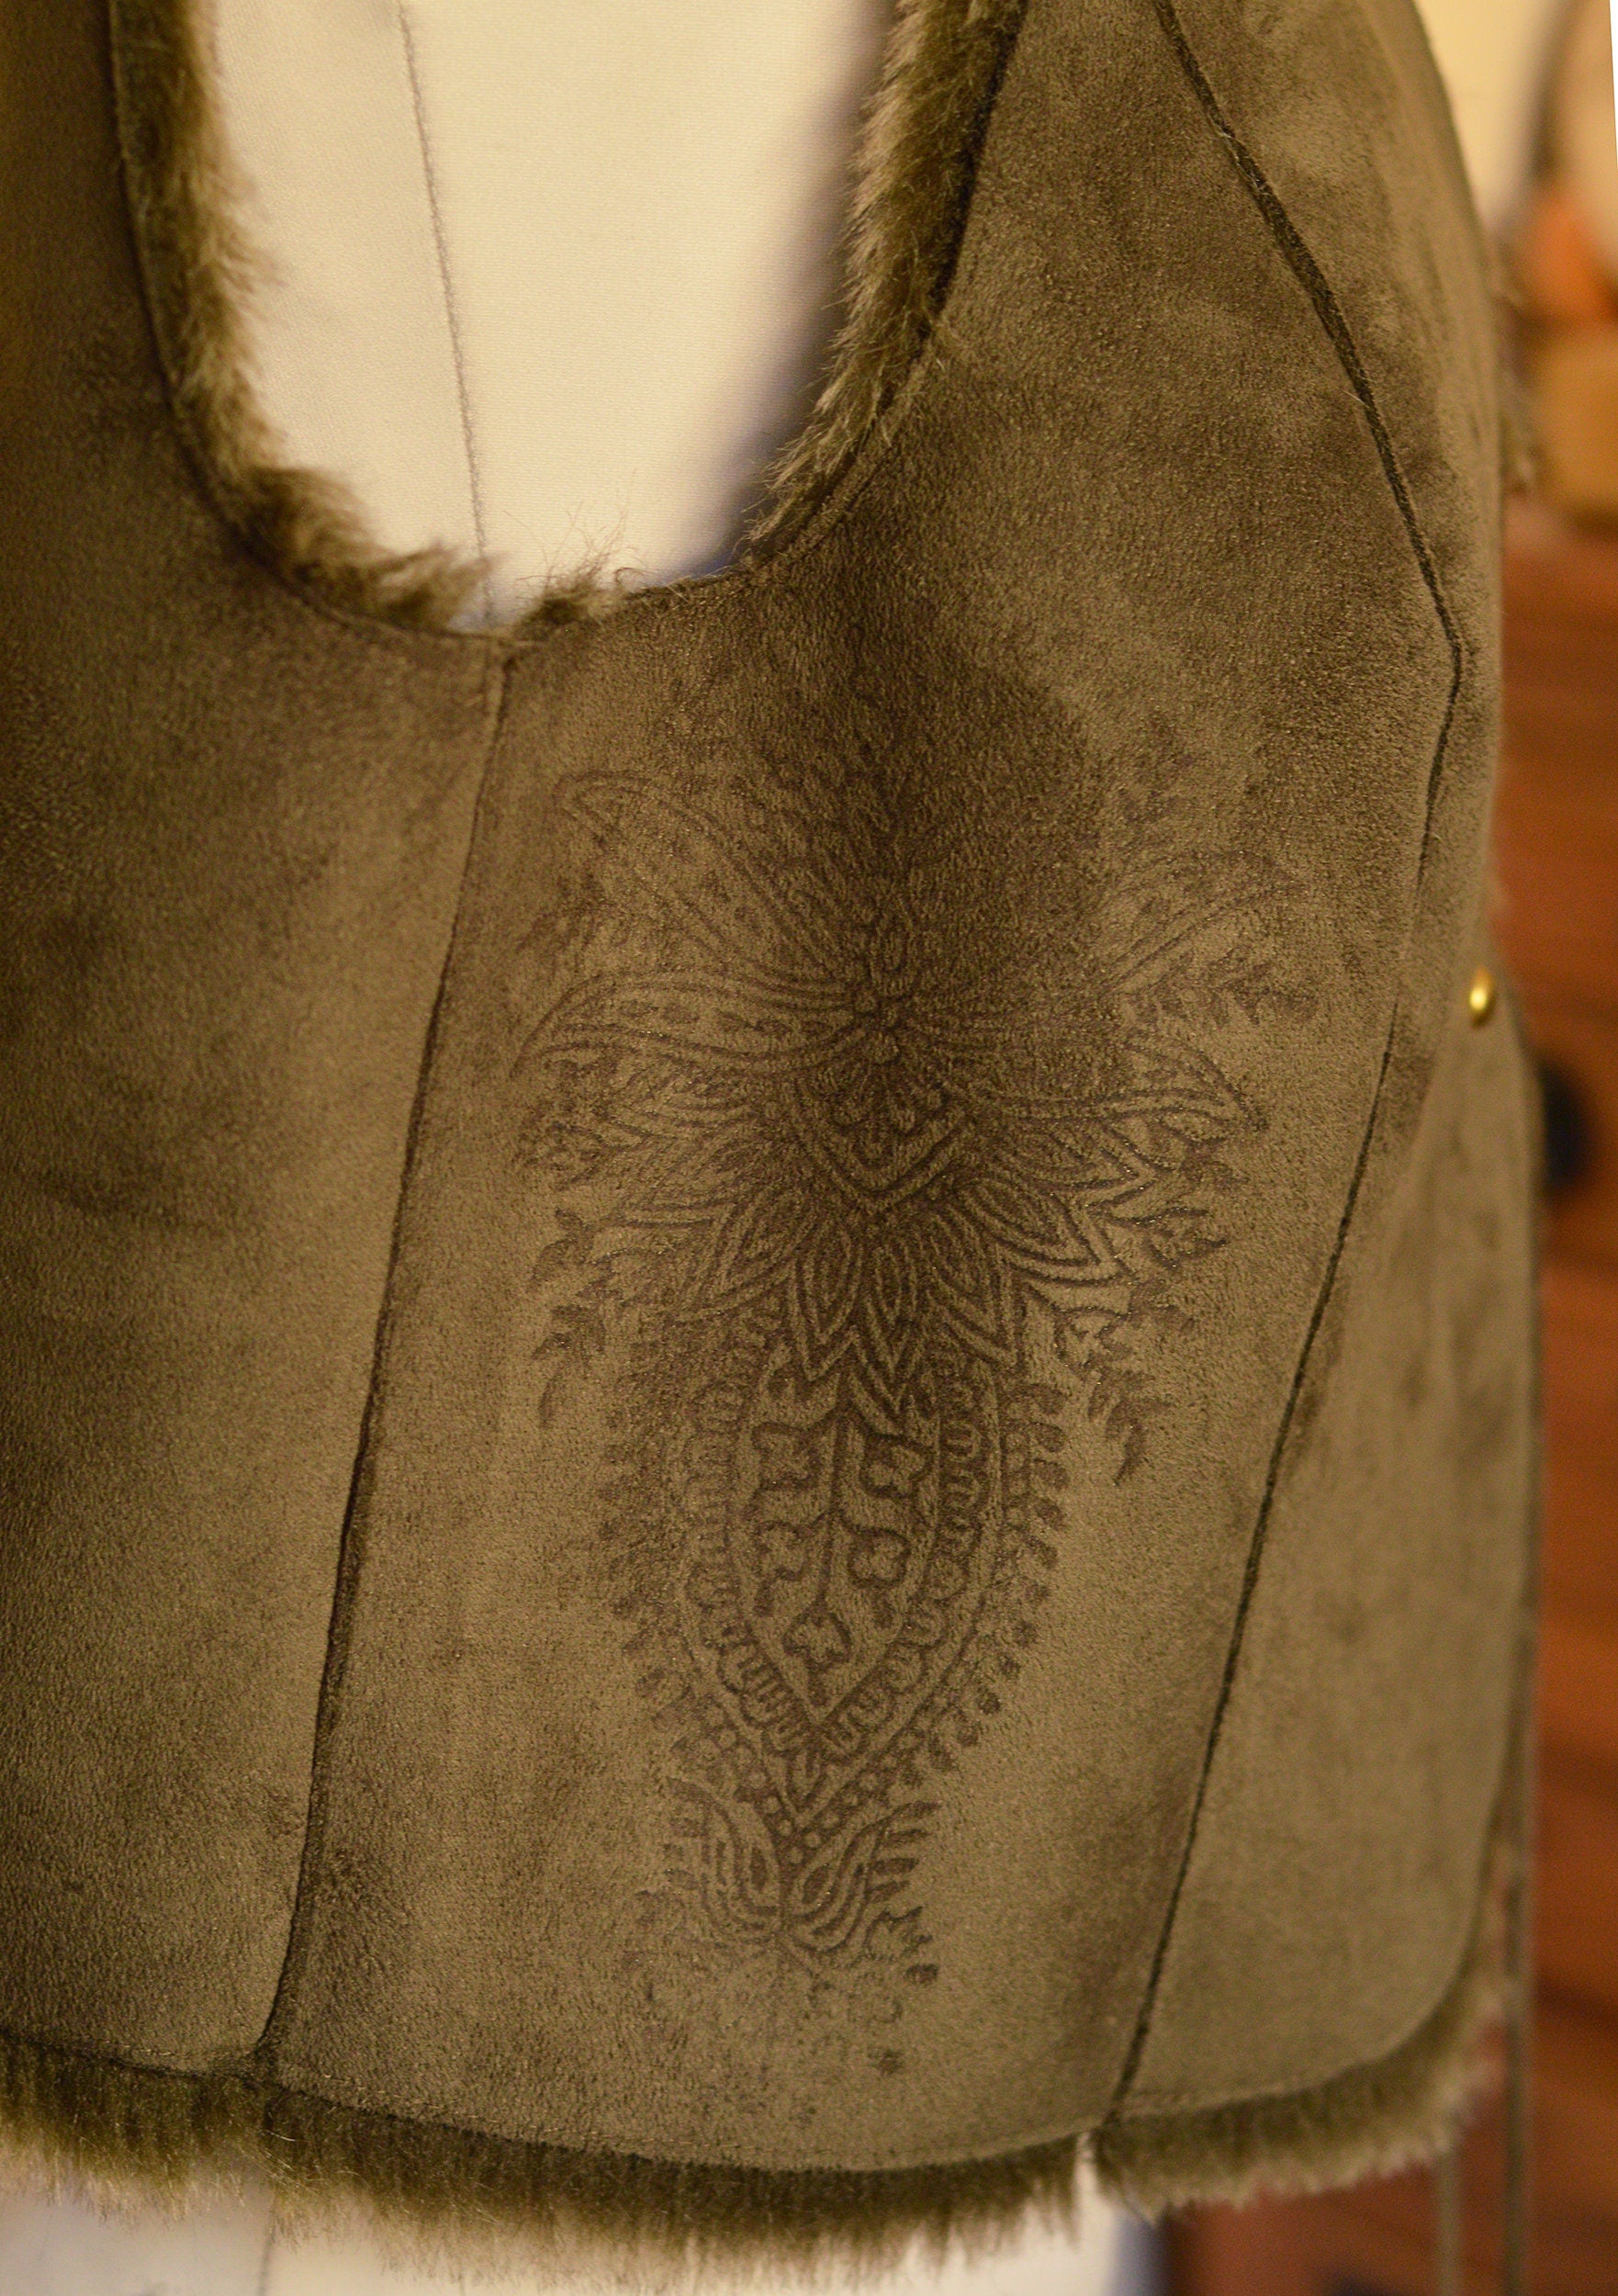 Army green cropped waistcoat. Seed of life applique,studs and hand printed